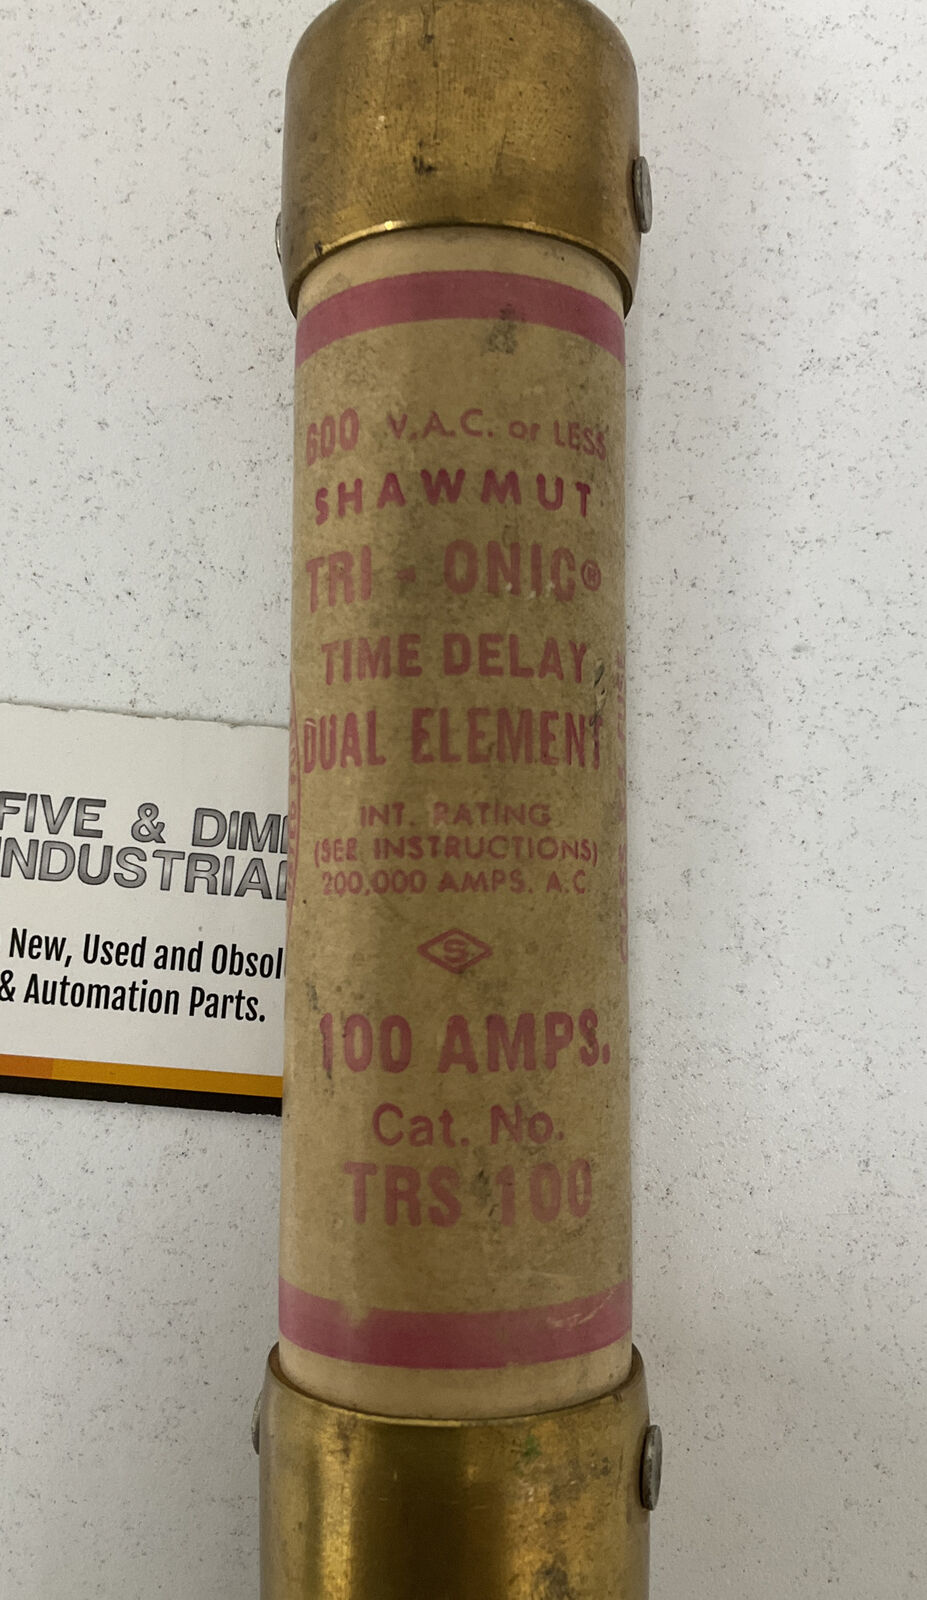 Gould Shawmut Tri-onic Time Delay Dual-Element Fuse TRS100 (CL217) - 0